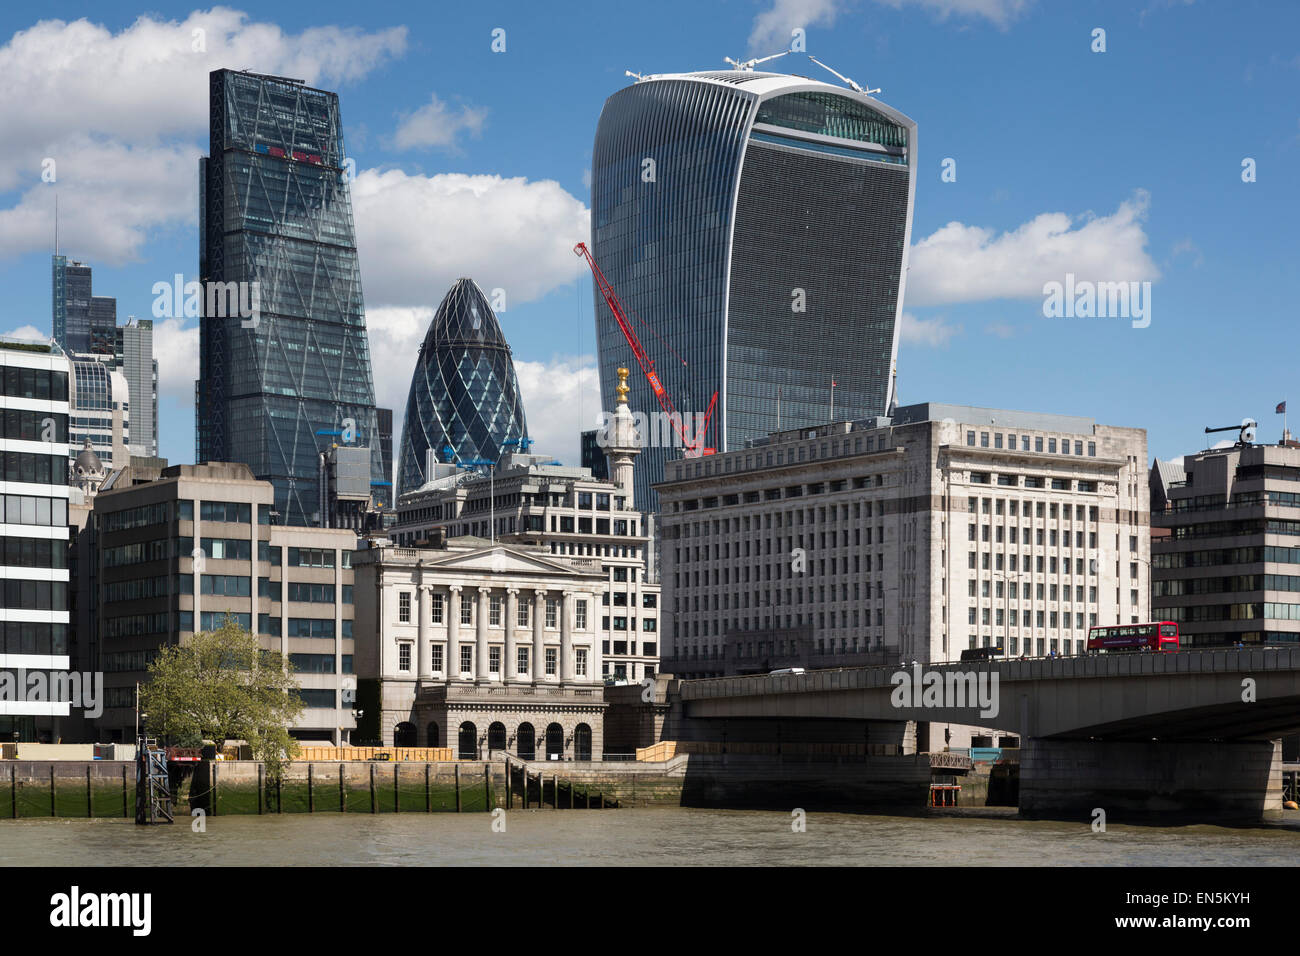 City of London skyline with London Bridge. Skyscrapers Gherkin, Cheesegrater and Walkie Talkie, London, England, UK Stock Photo